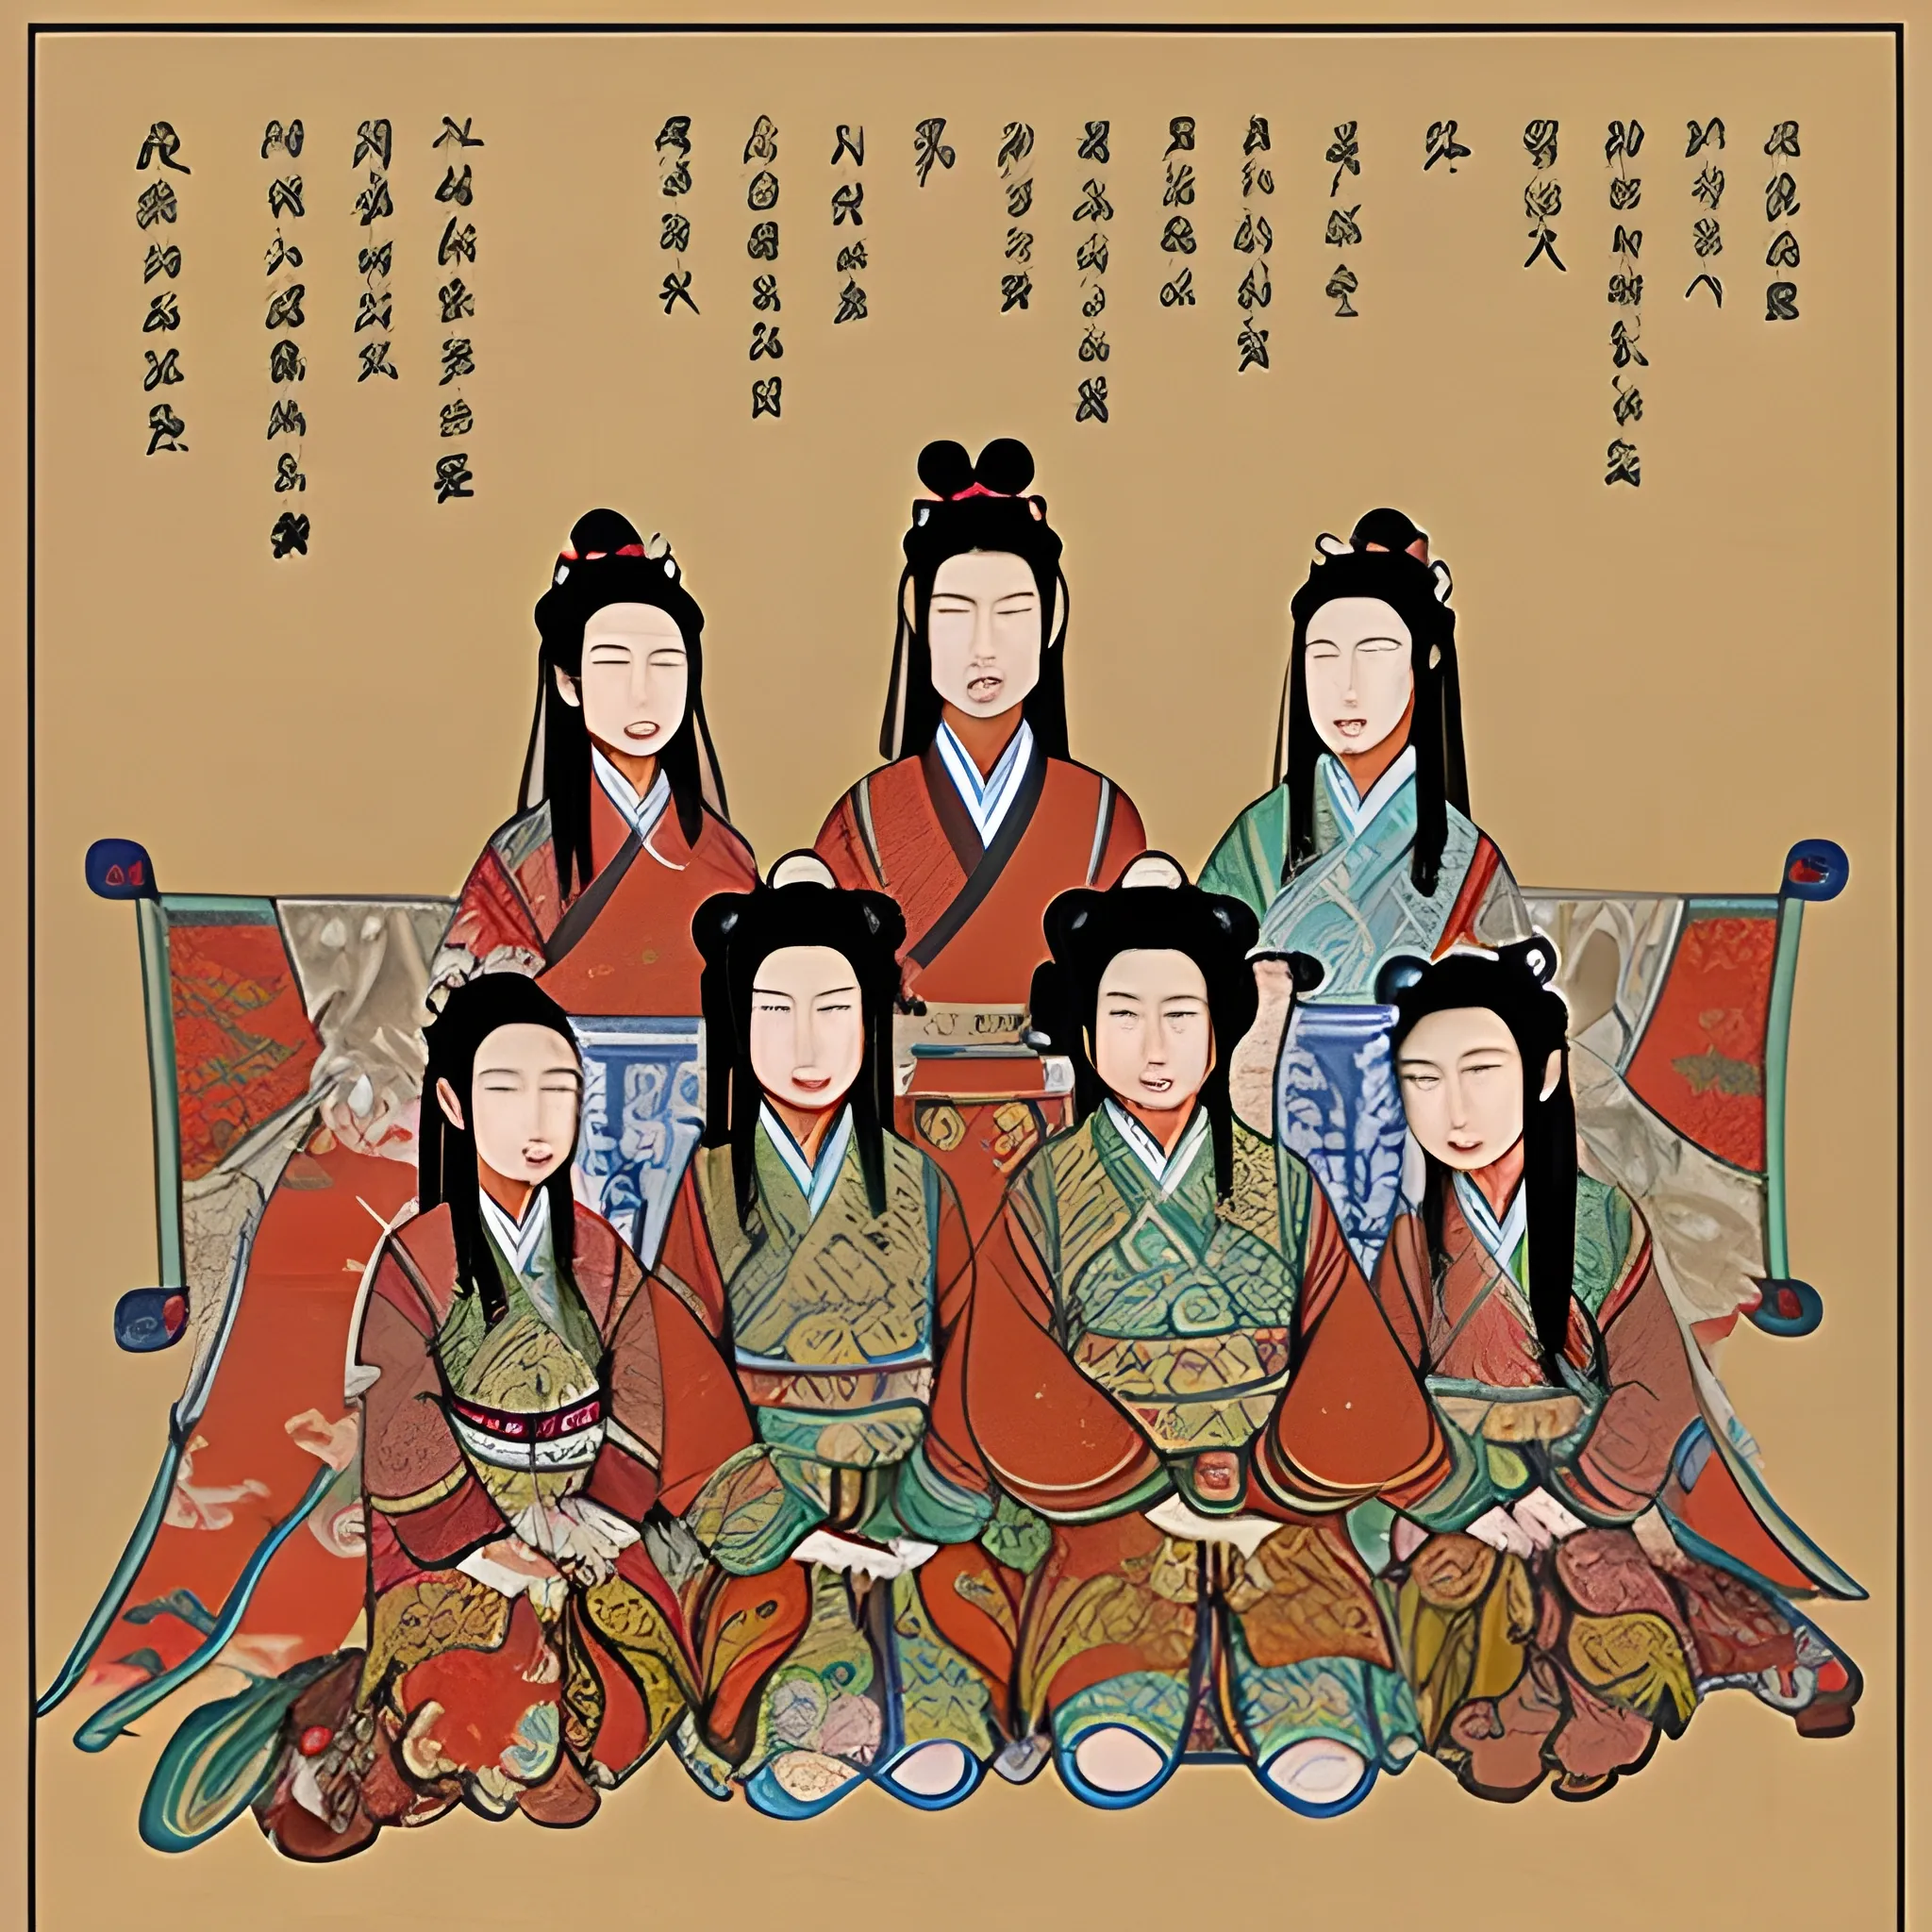 During the Northern Song Dynasty in China, the Jin people forcibly abducted the royal family of the Song Dynasty and sexually insulted them
